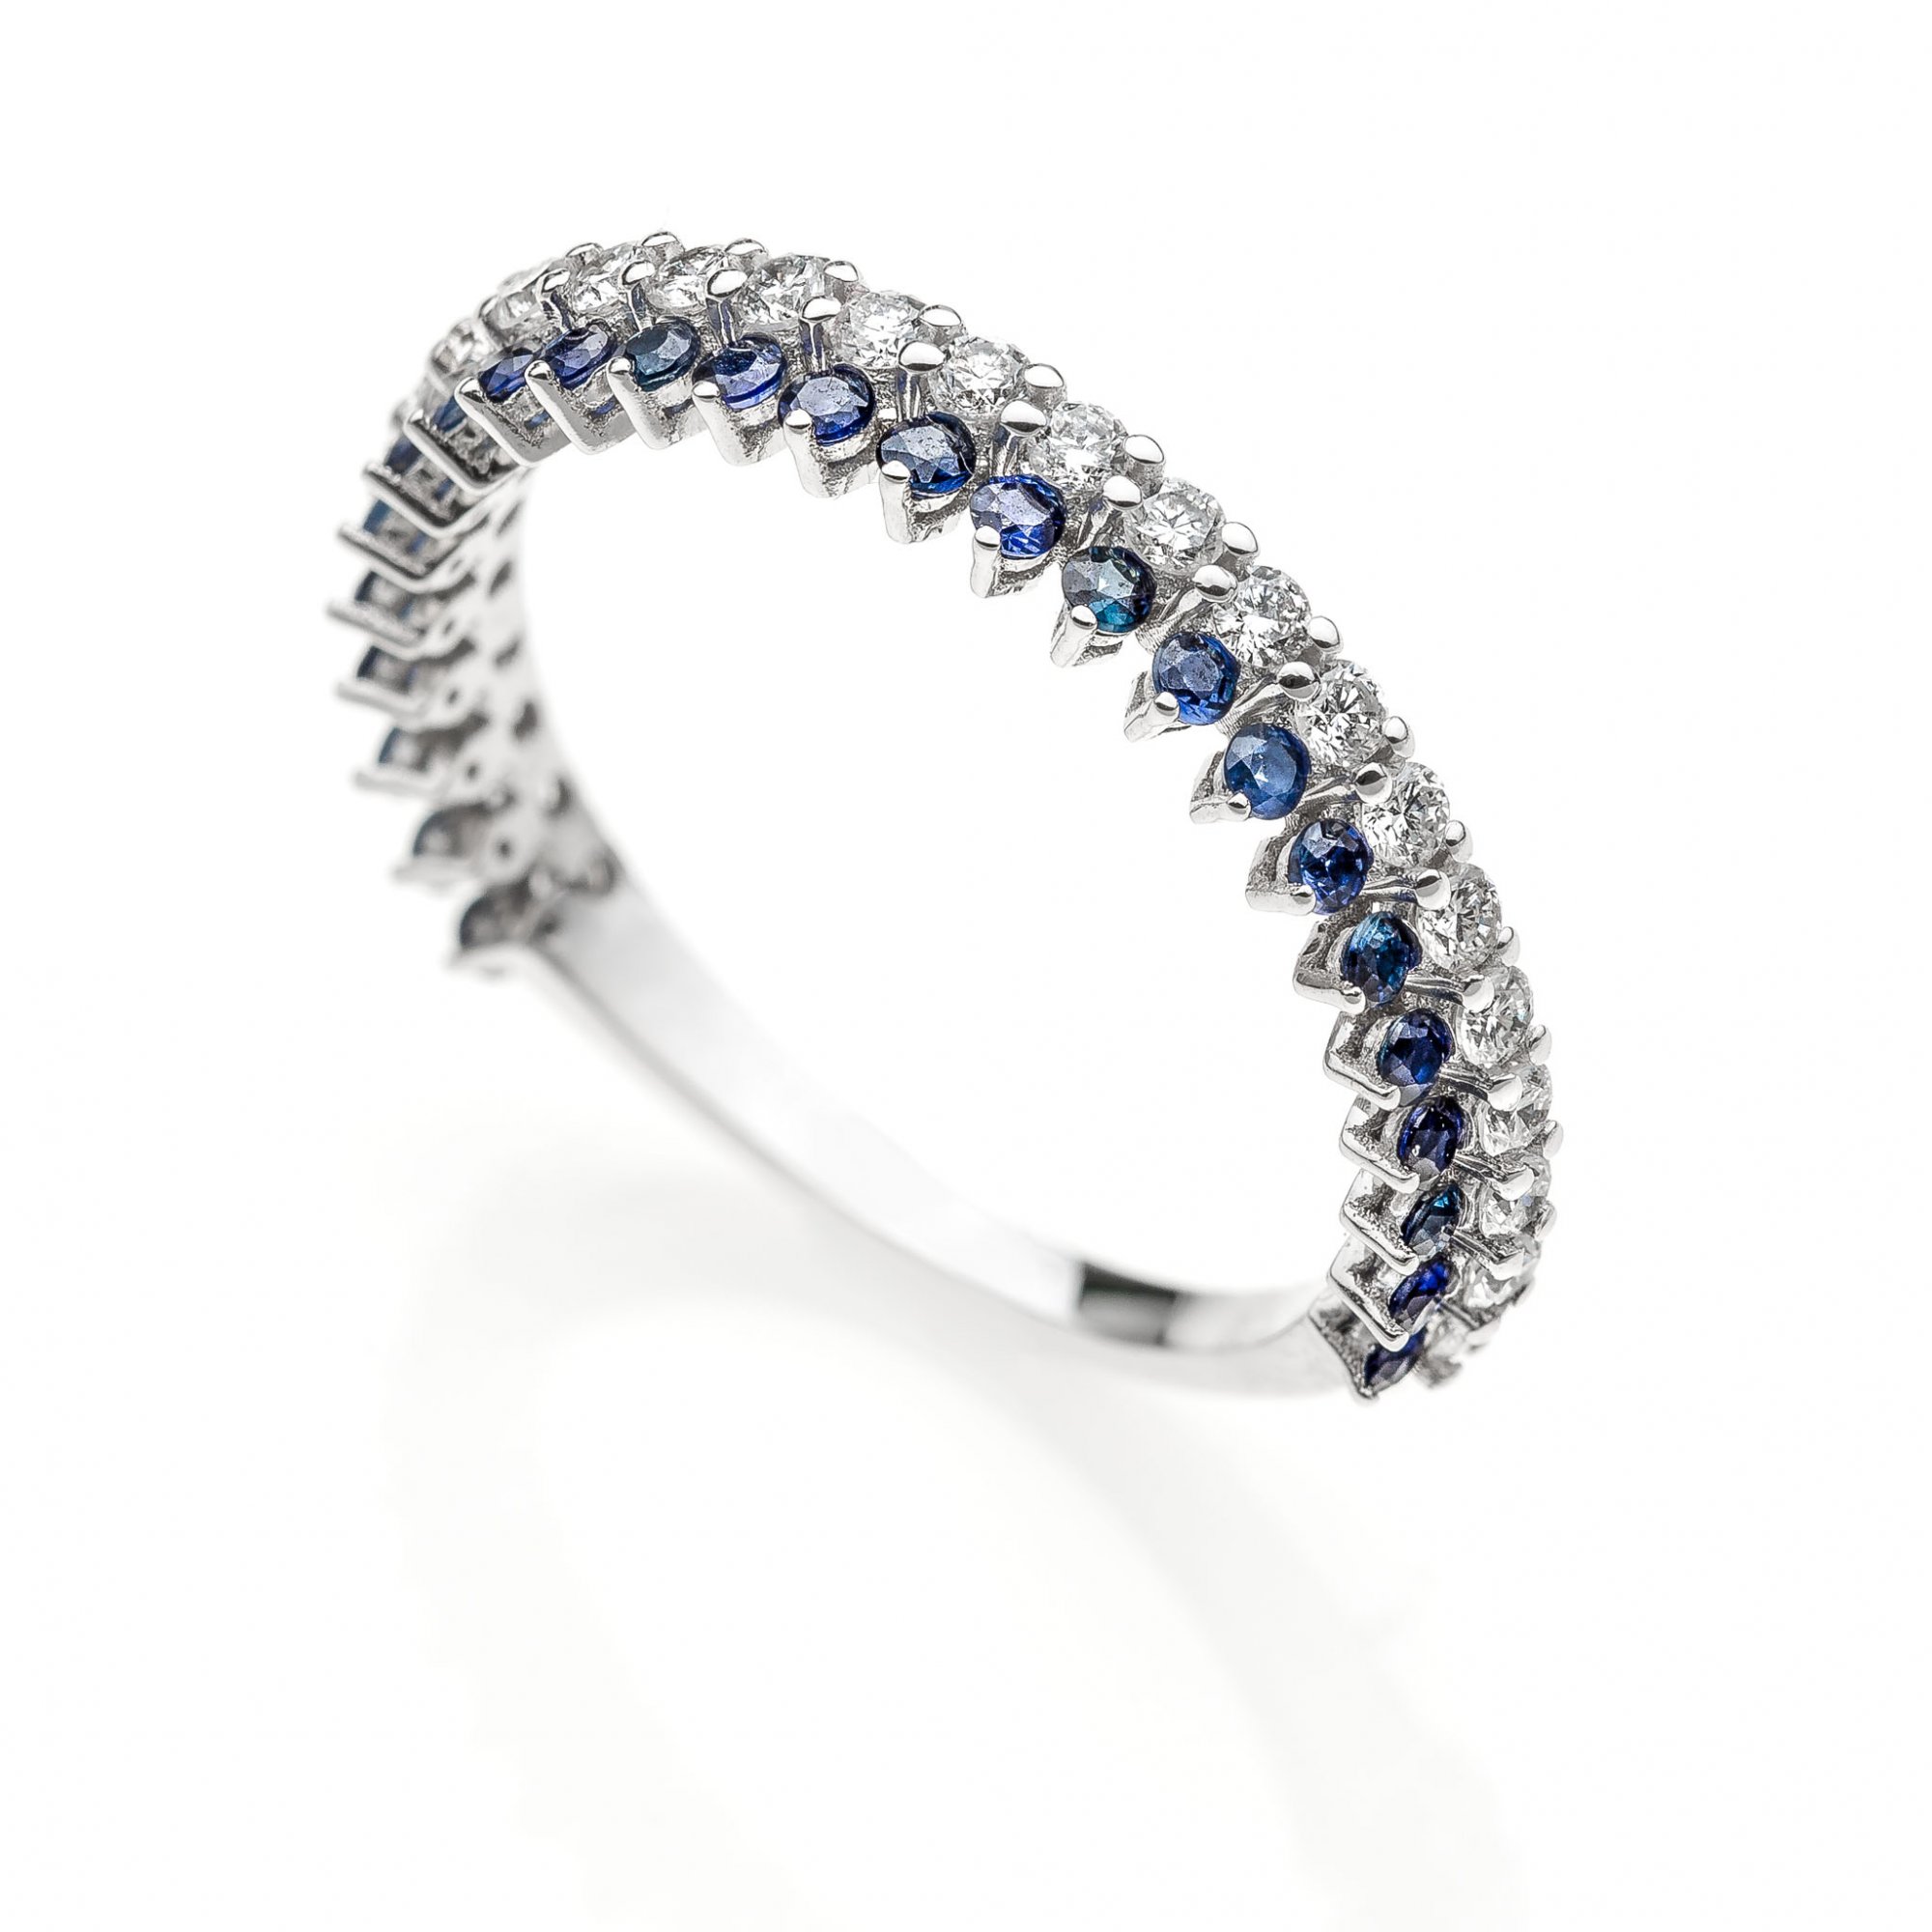 18 KT white gold ring with natural sapphire and natural round brilliant cut diamonds